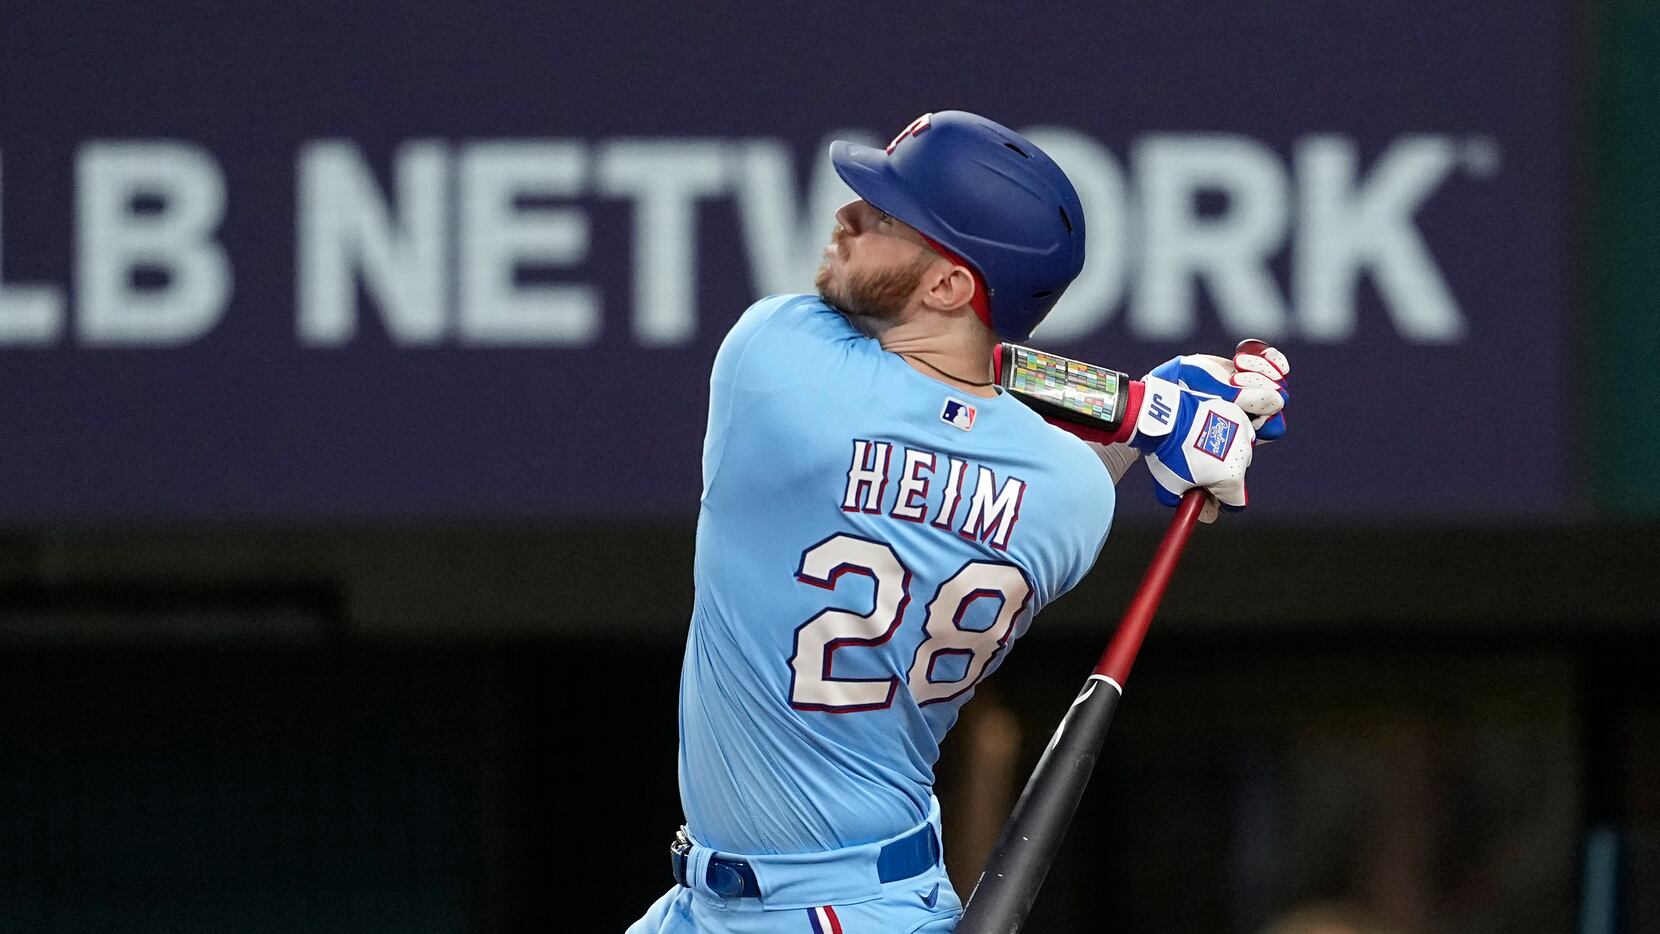 Rangers catcher Jonah Heim is playing well, but why did he cut his hair?